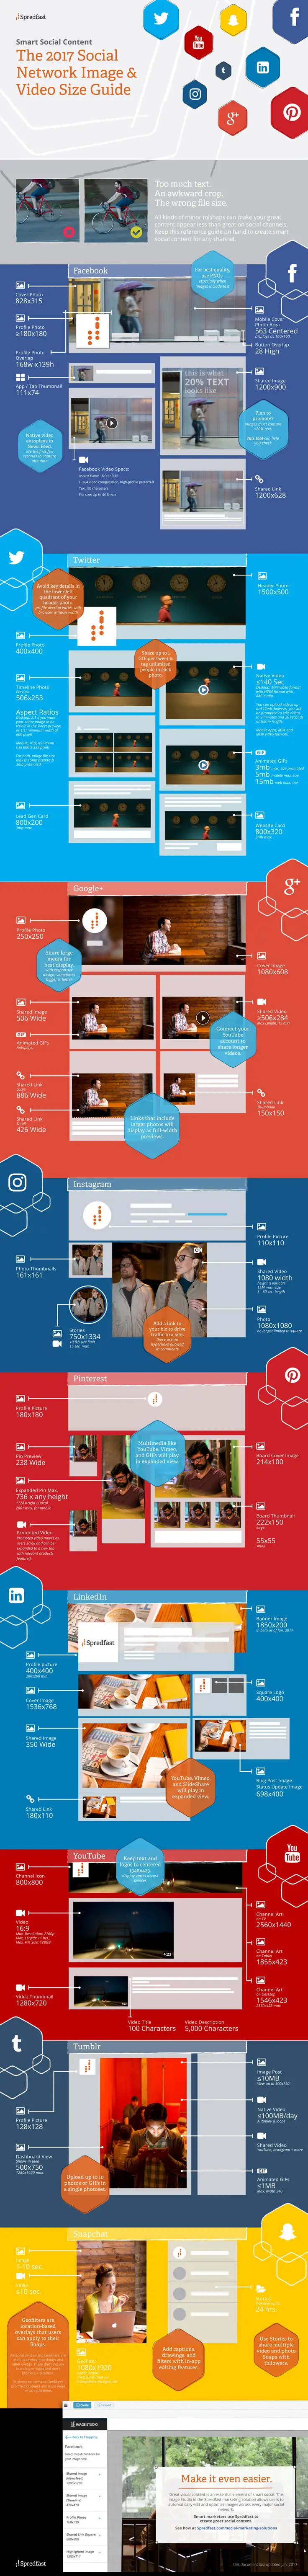 The Ultimate Social Media Image, Video and Post Size Guide [Infographic]